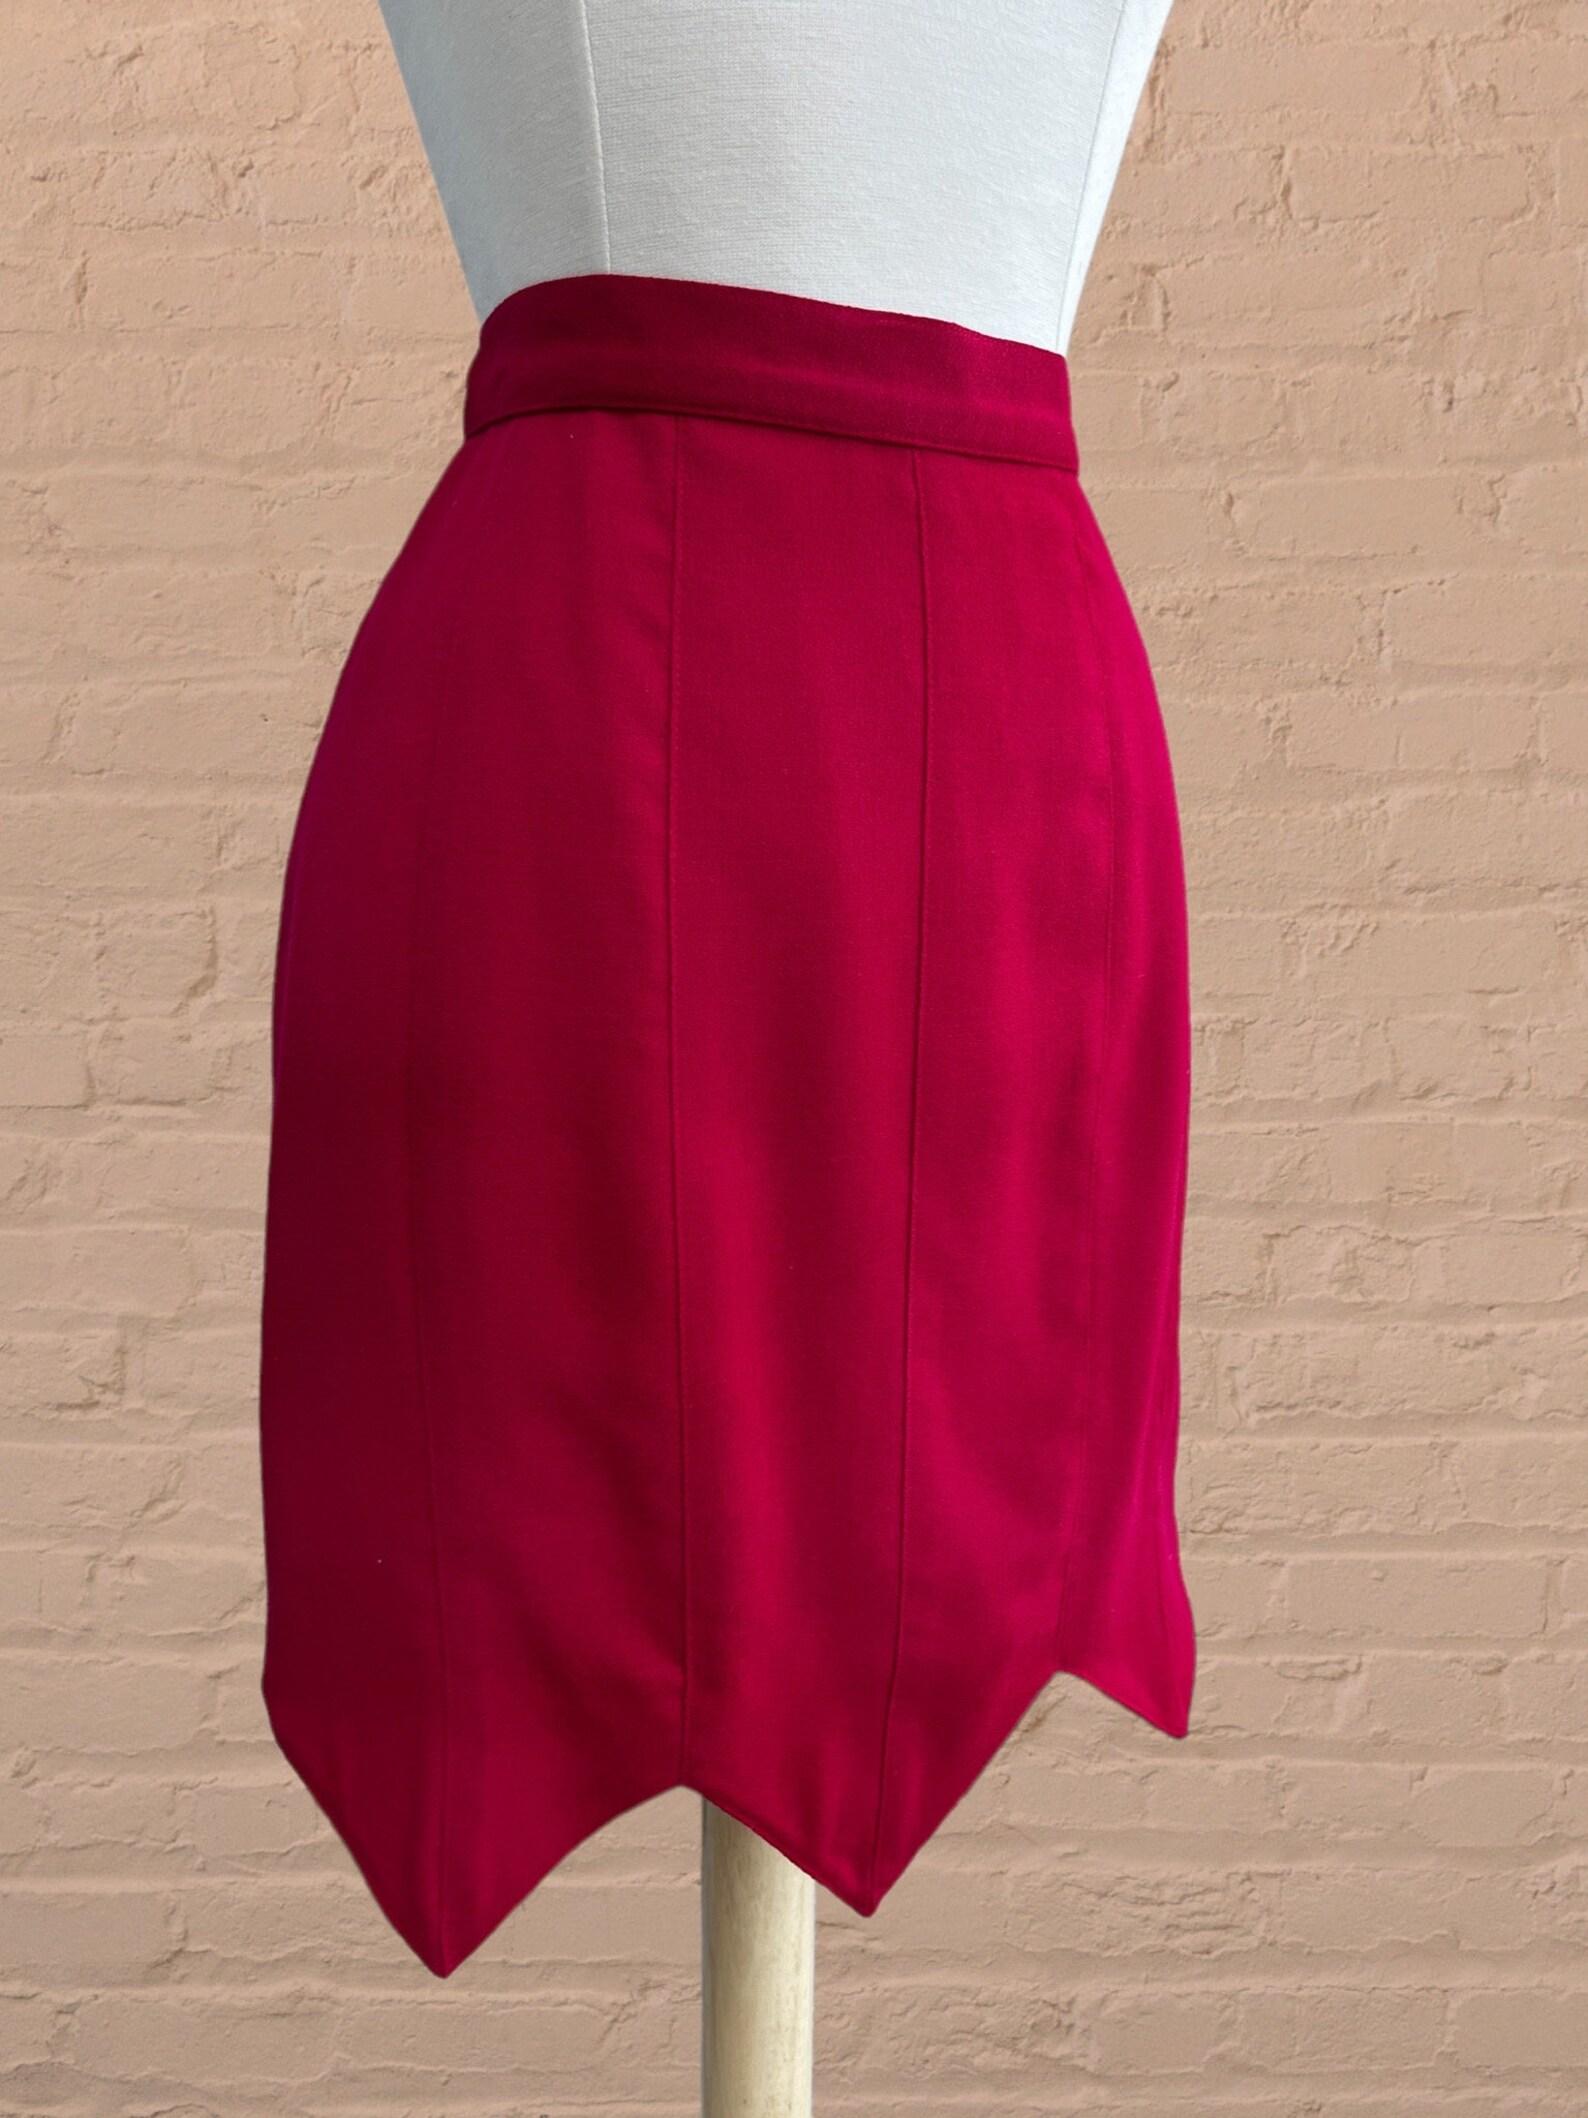 Gemma Kahng Berry Pink Wool Mini Skirt, Circa 1990s In Good Condition For Sale In Brooklyn, NY